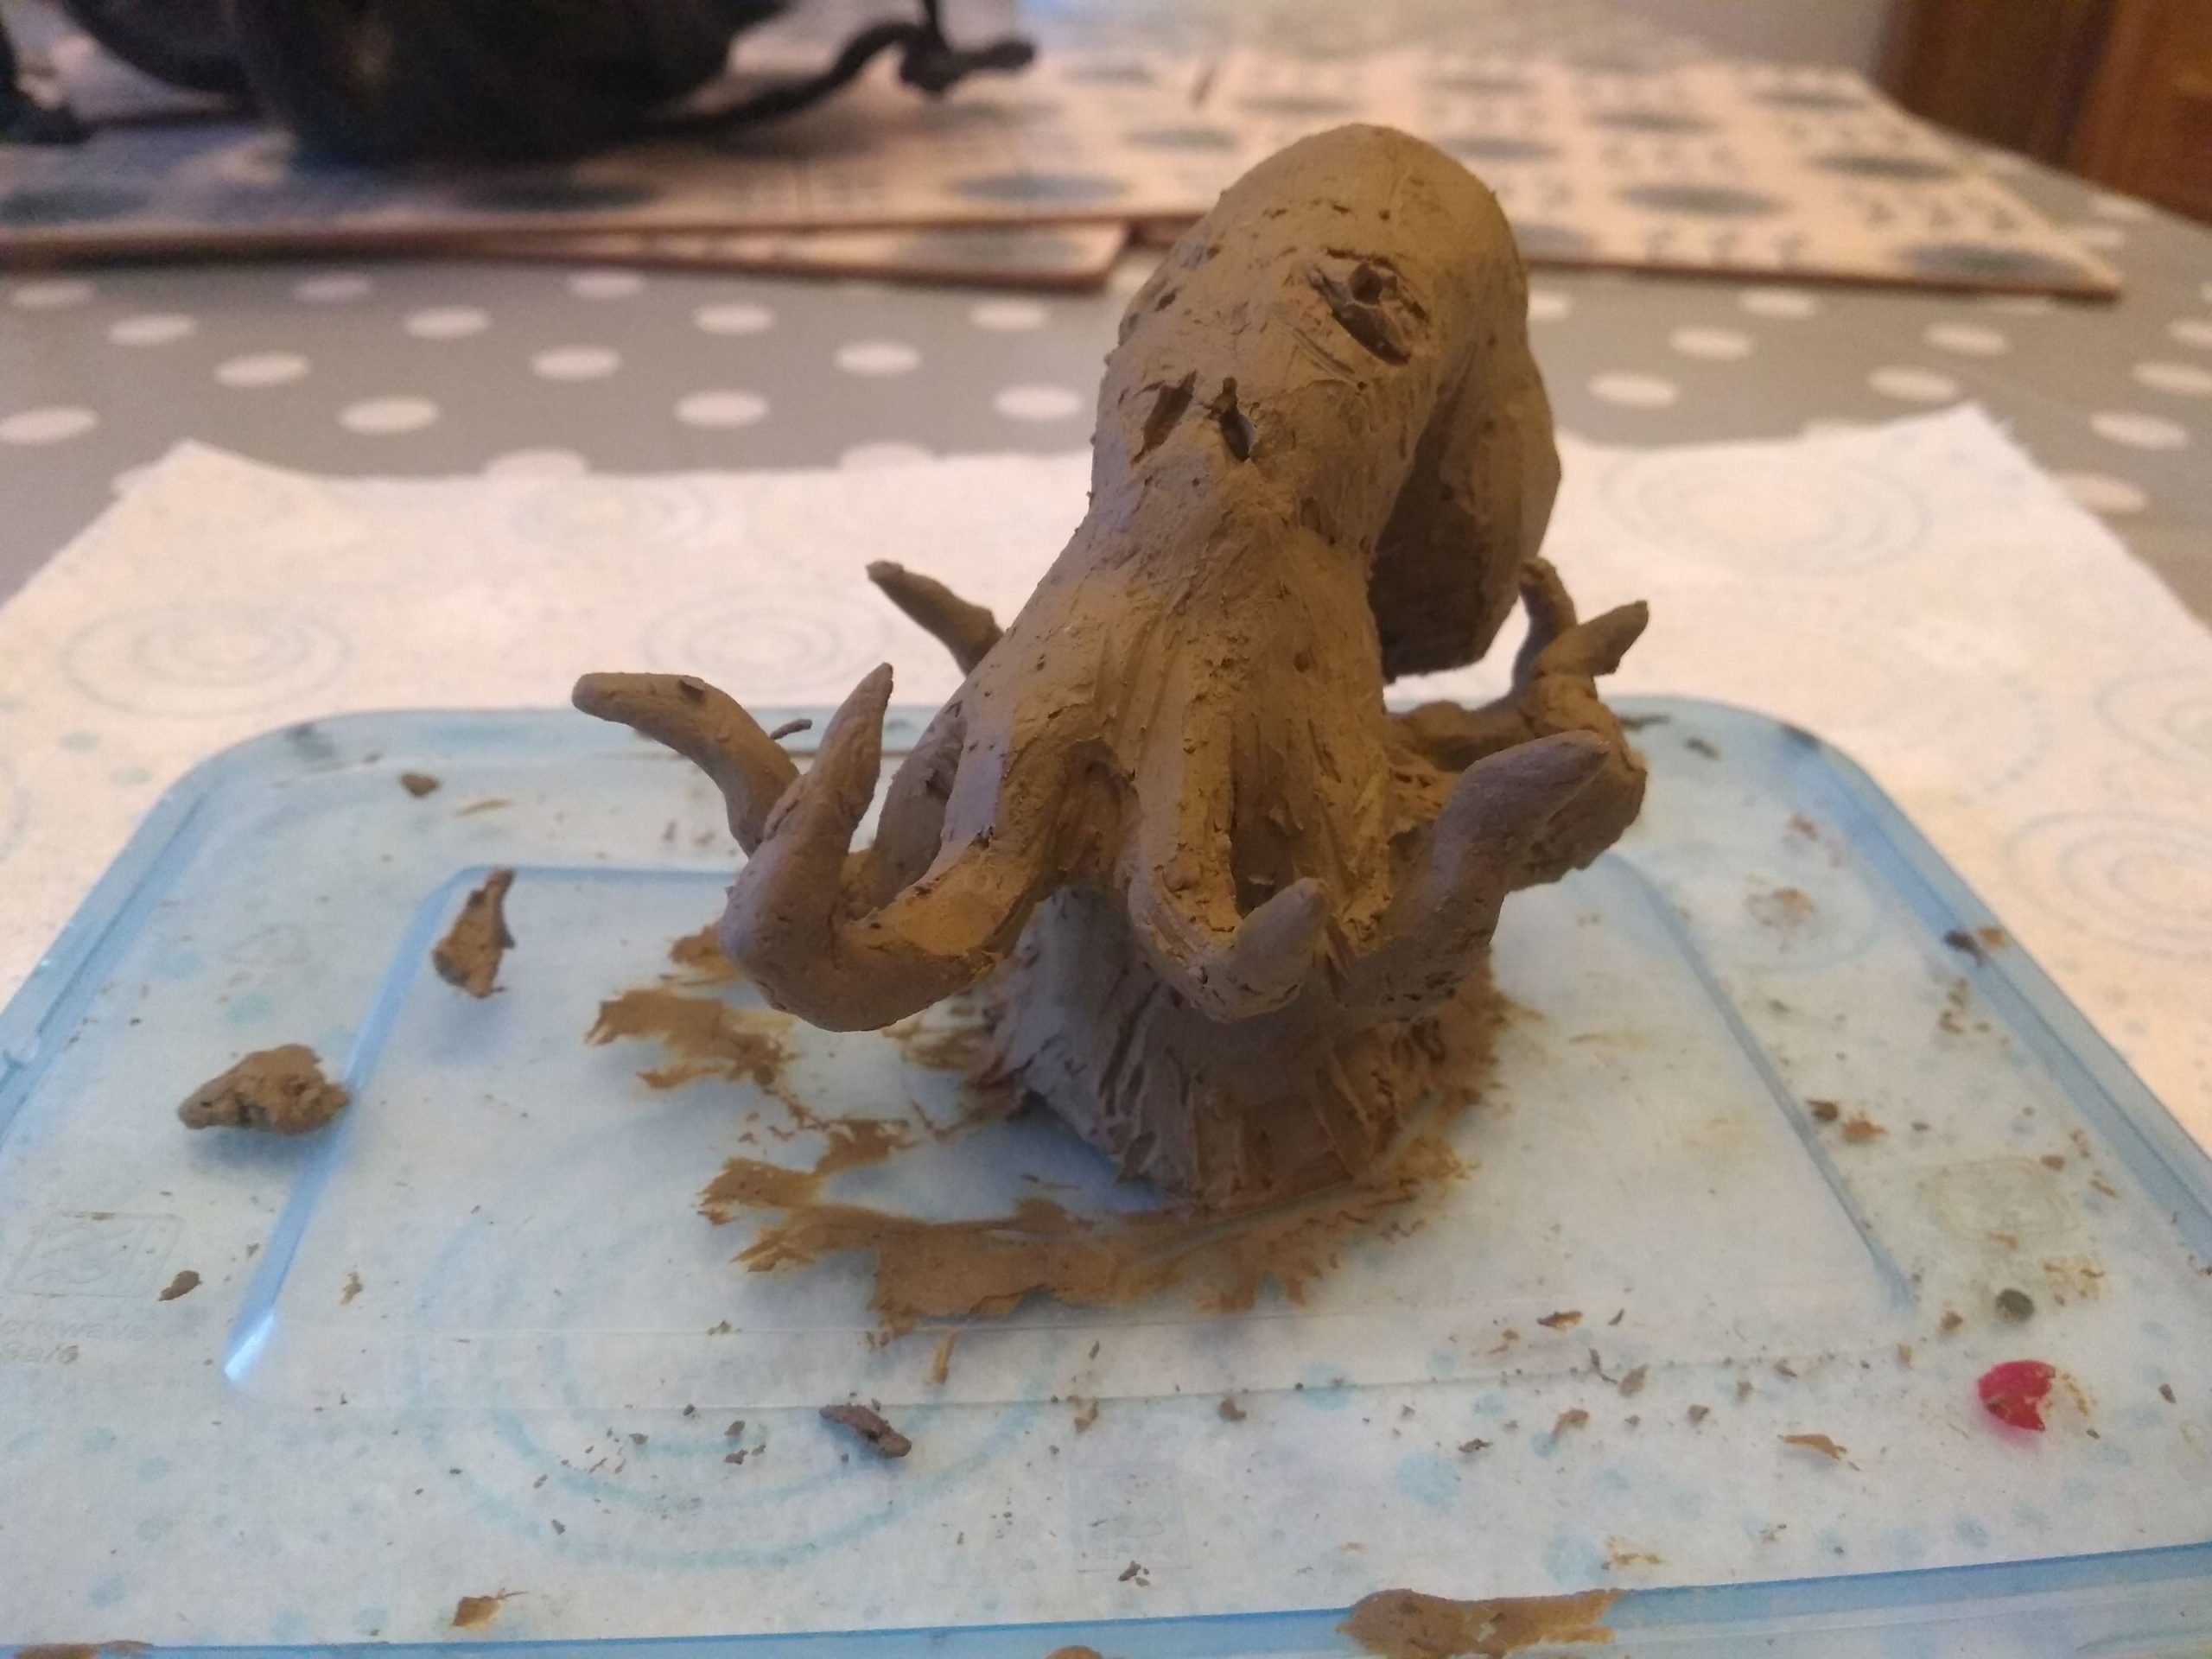 Clay sculpture of an octopus, its tentacles are rearing up around it.